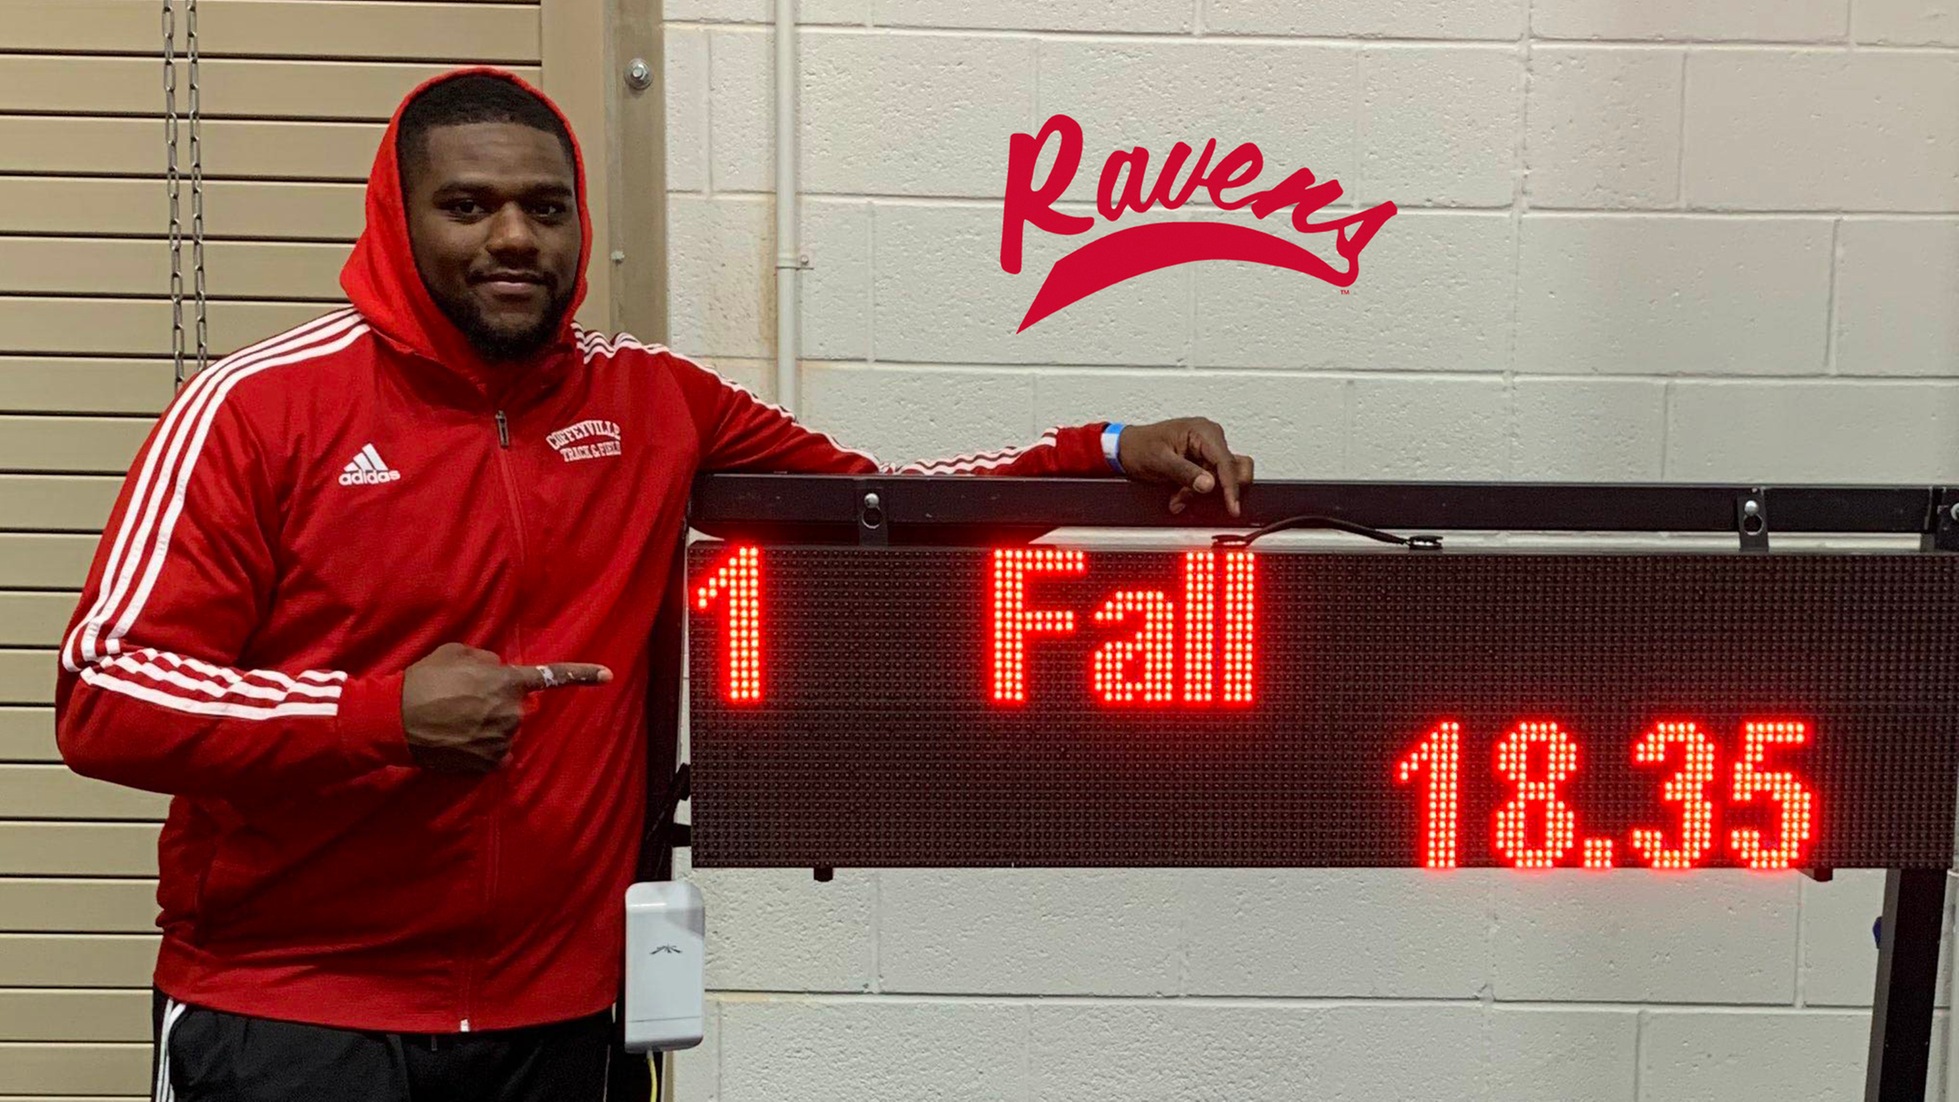 Red Raven Track & Field Compete at NJCAA Indoor National Meet, Mustafa Fall Wins Shot Put National Title